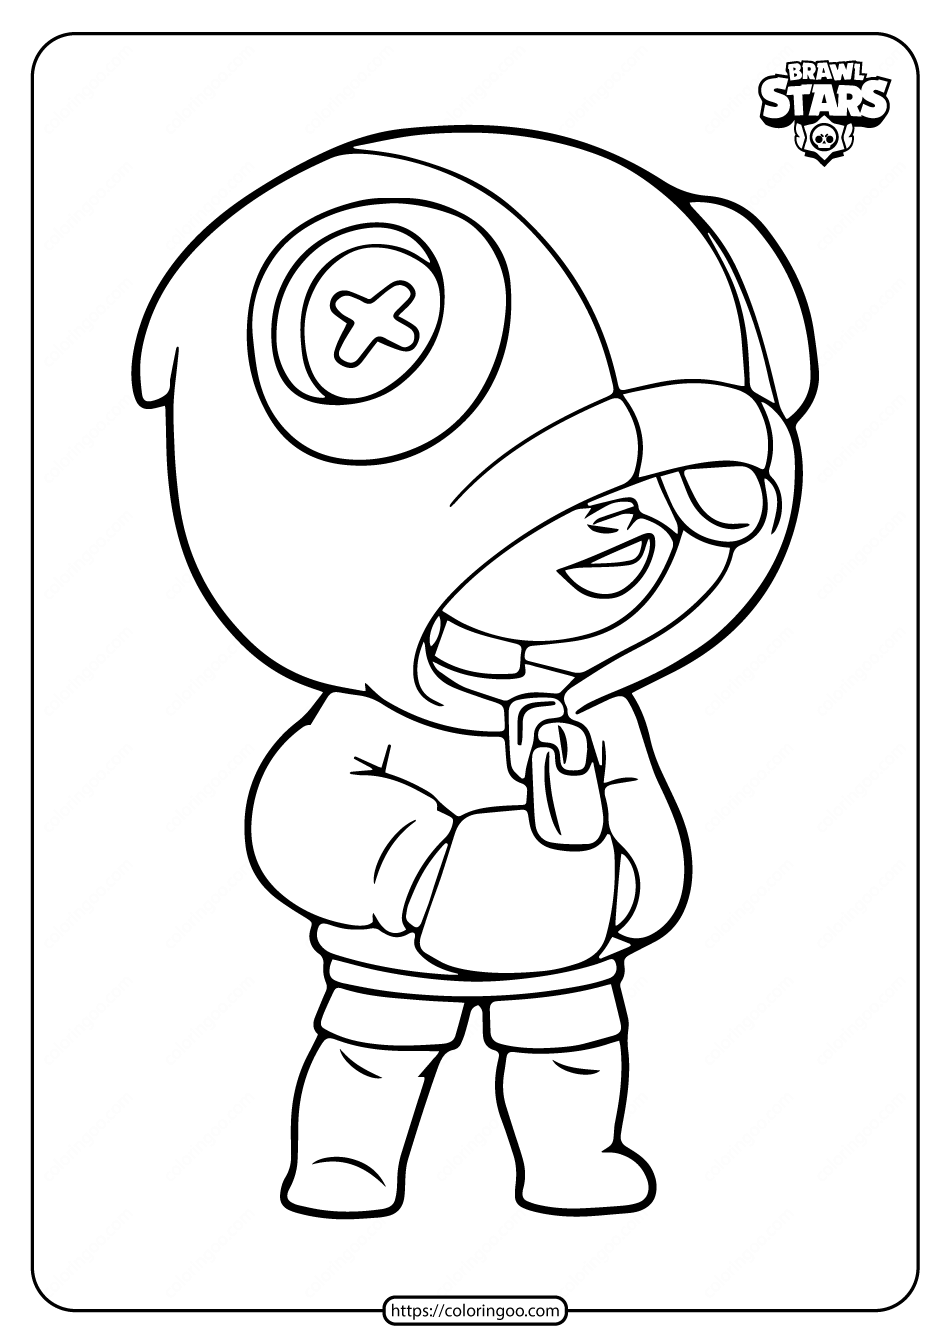 Brawl Stars Leon Default Skin Coloring Pages - Free Printable Coloring